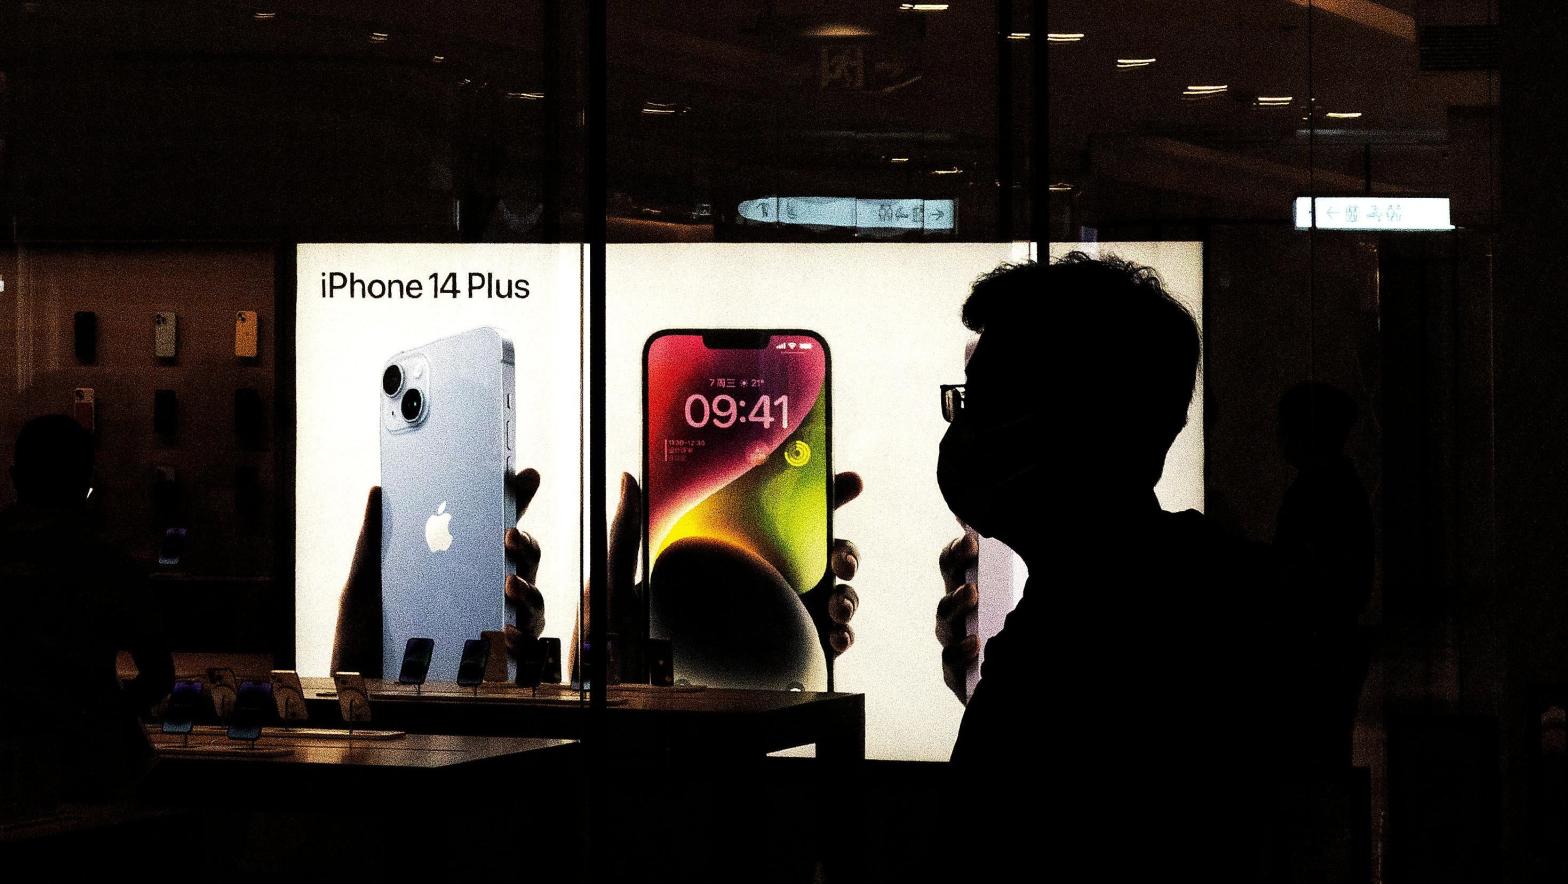 Customers line up at an Apple Store to pick up their orders of the new iPhone 14 on September 16, 2022 in Wuhan, Hubei, China (Photo: Getty Images, Getty Images)